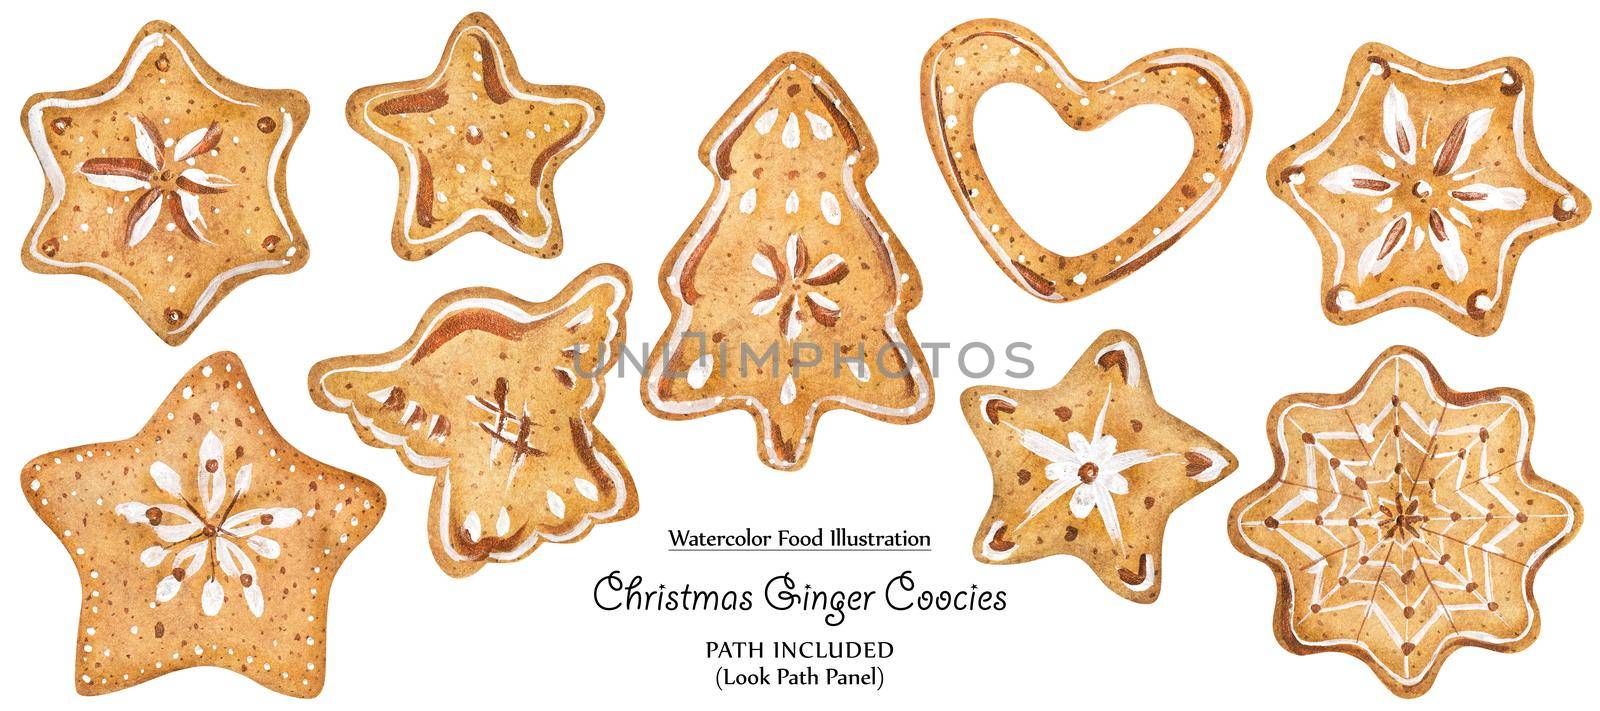 Watercolor food illustration. Homemade decorated Christmas gingerbread. Isolated, path included